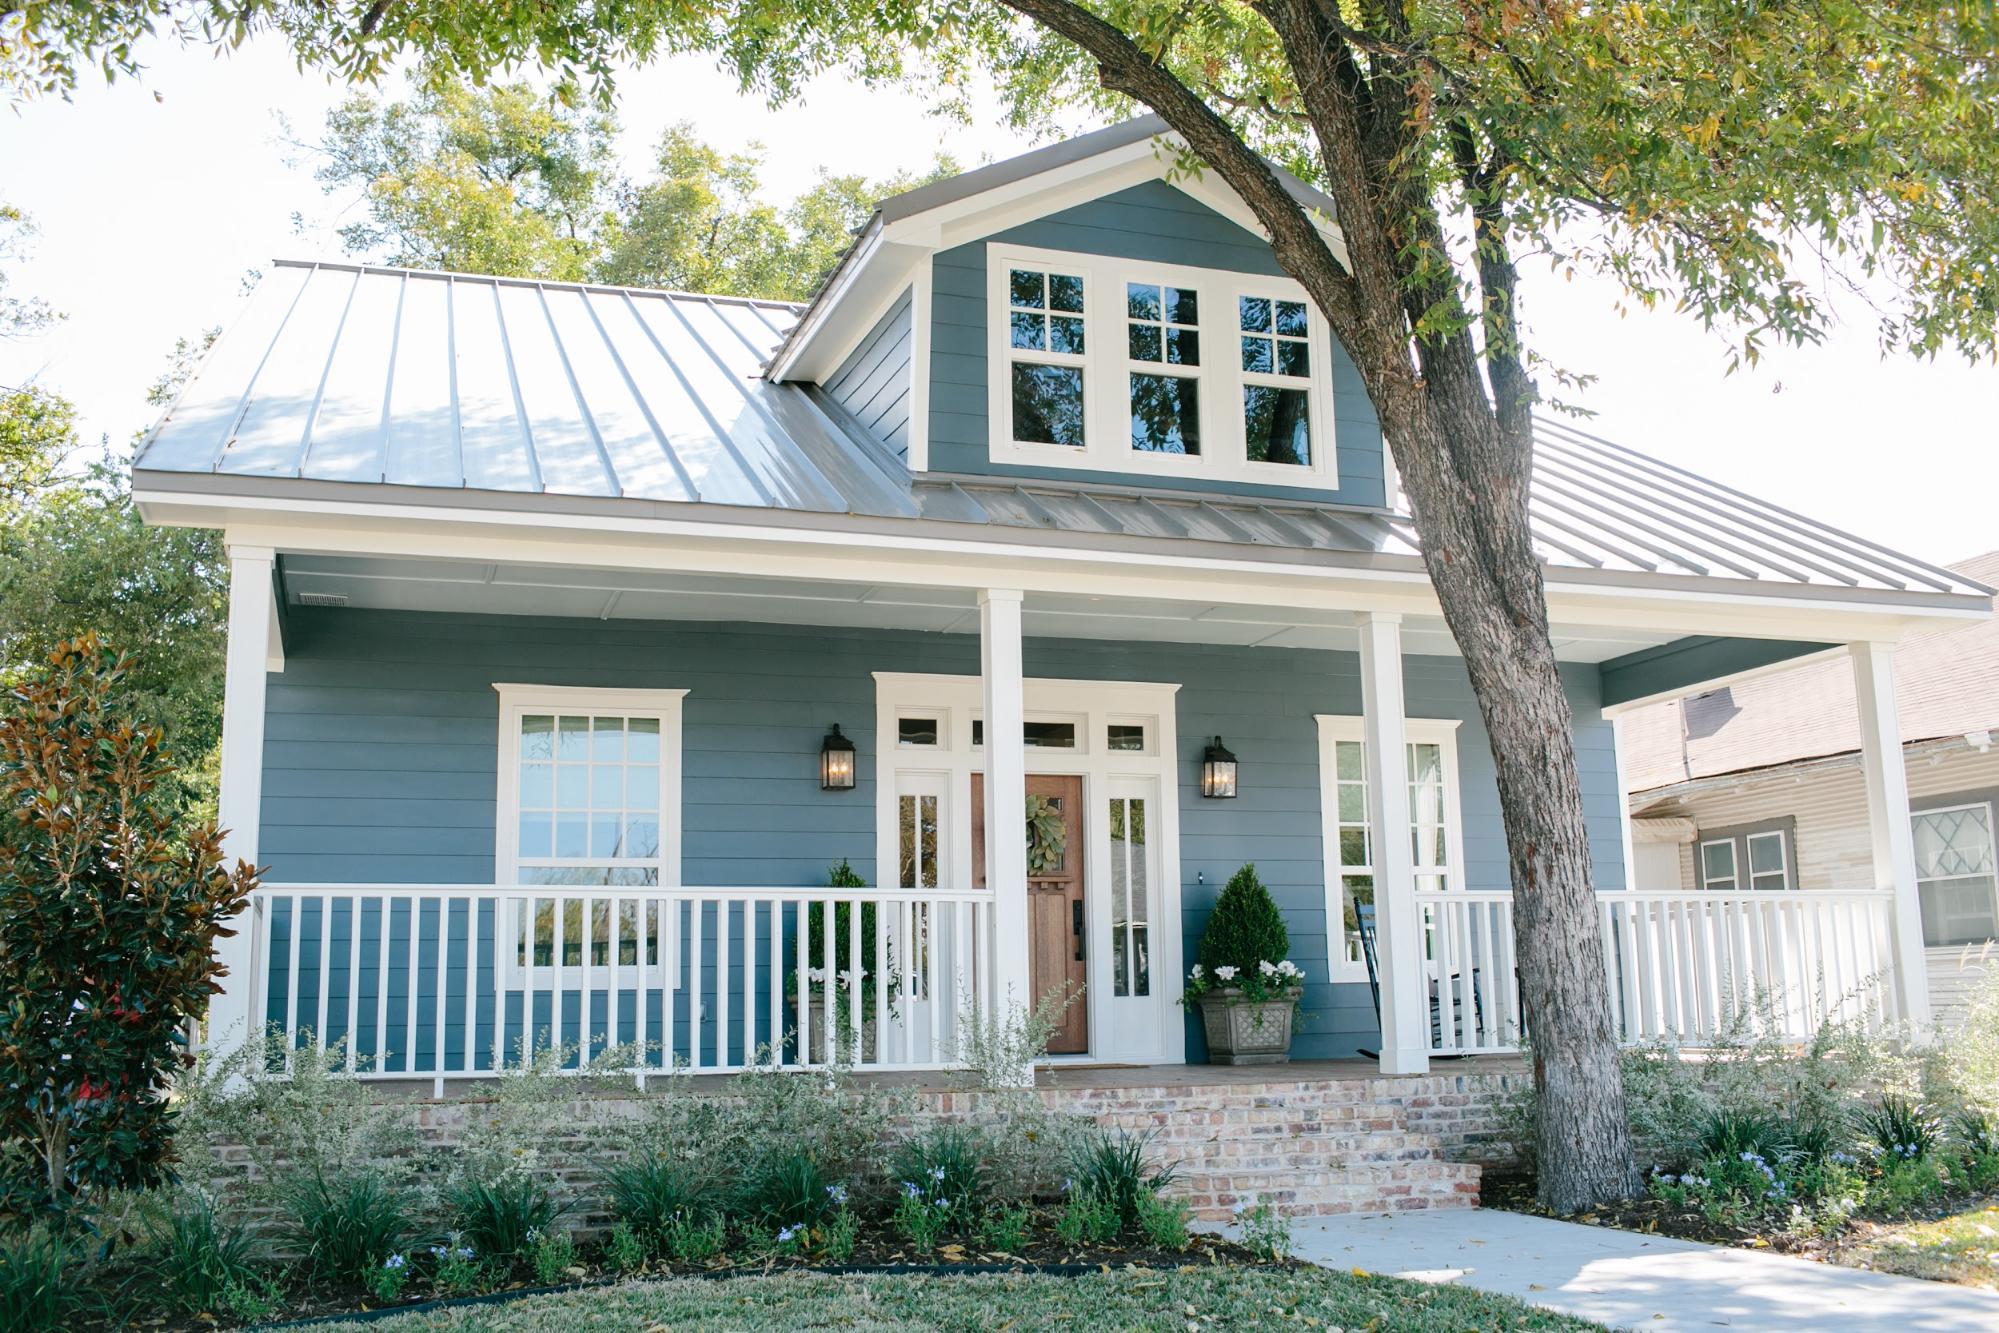 You Won't Believe What Happened to These Famous 'Fixer Upper' Houses